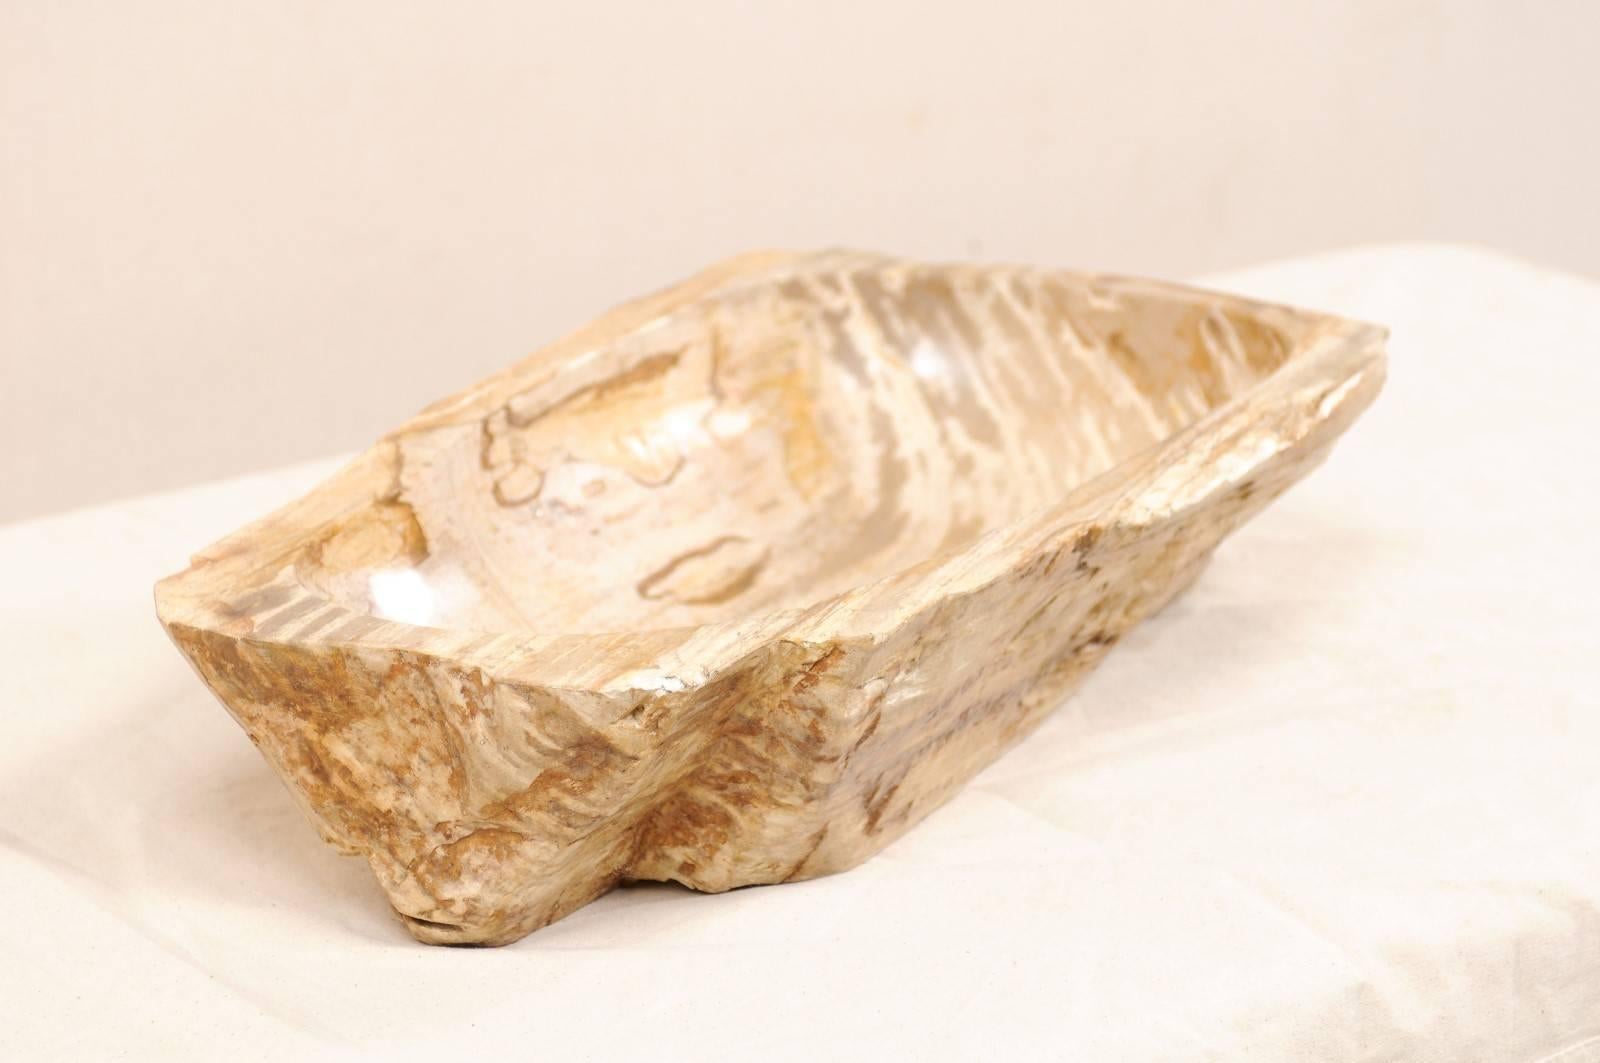 A petrified wood sink. This petrified wood sink has an oblong shape, with flatter back and right sides. The colors are primarily in beige and cream tones, with richer brown and taupe tones. While the interior of the bowl has been polished, the